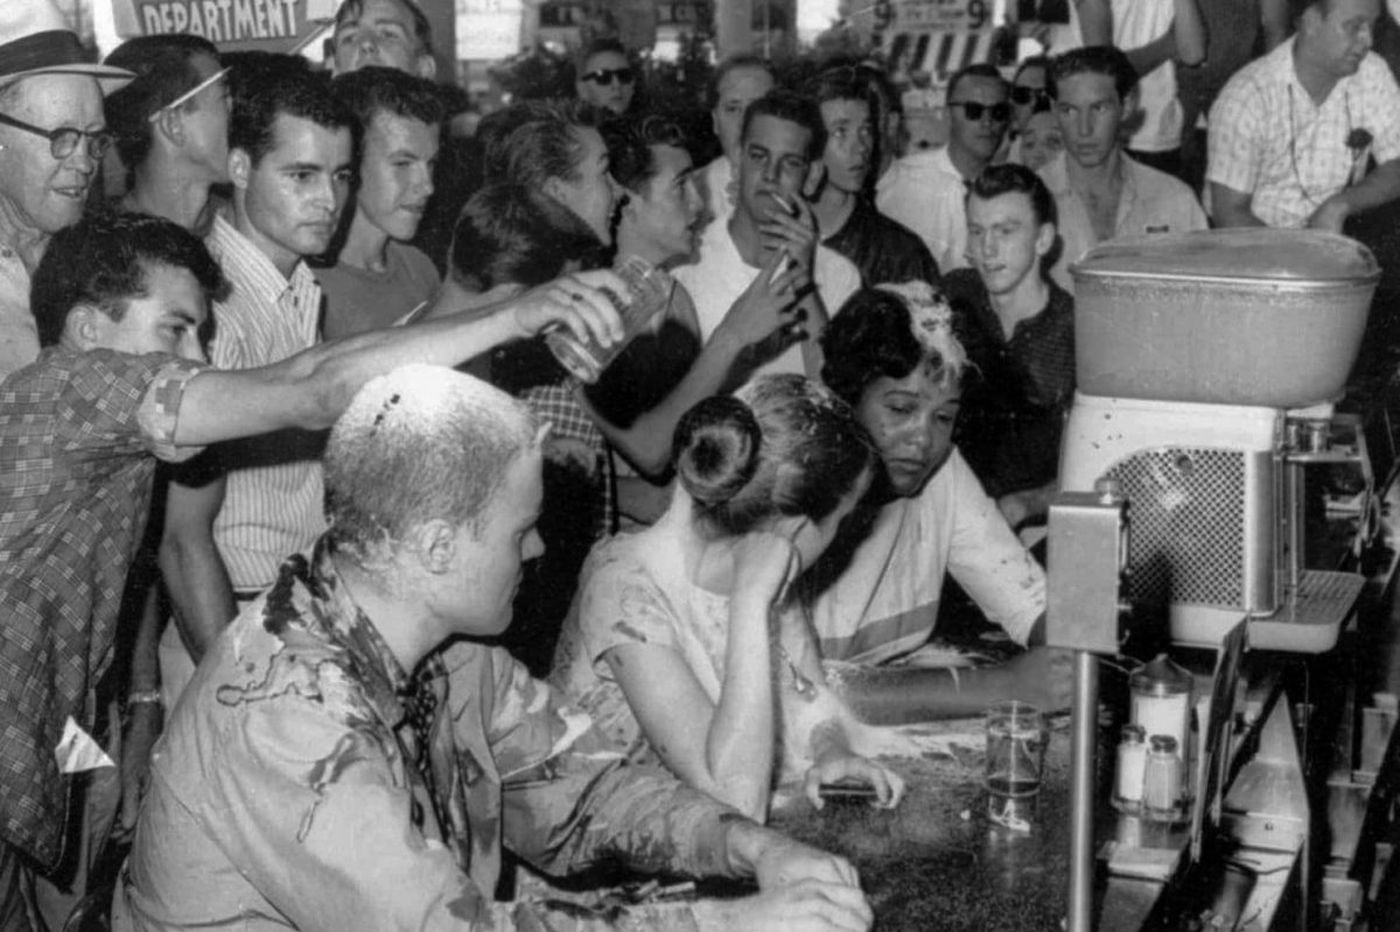 Before video of a Starbucks arrest, images of lunch counter sit-ins helped launch a ...1400 x 932